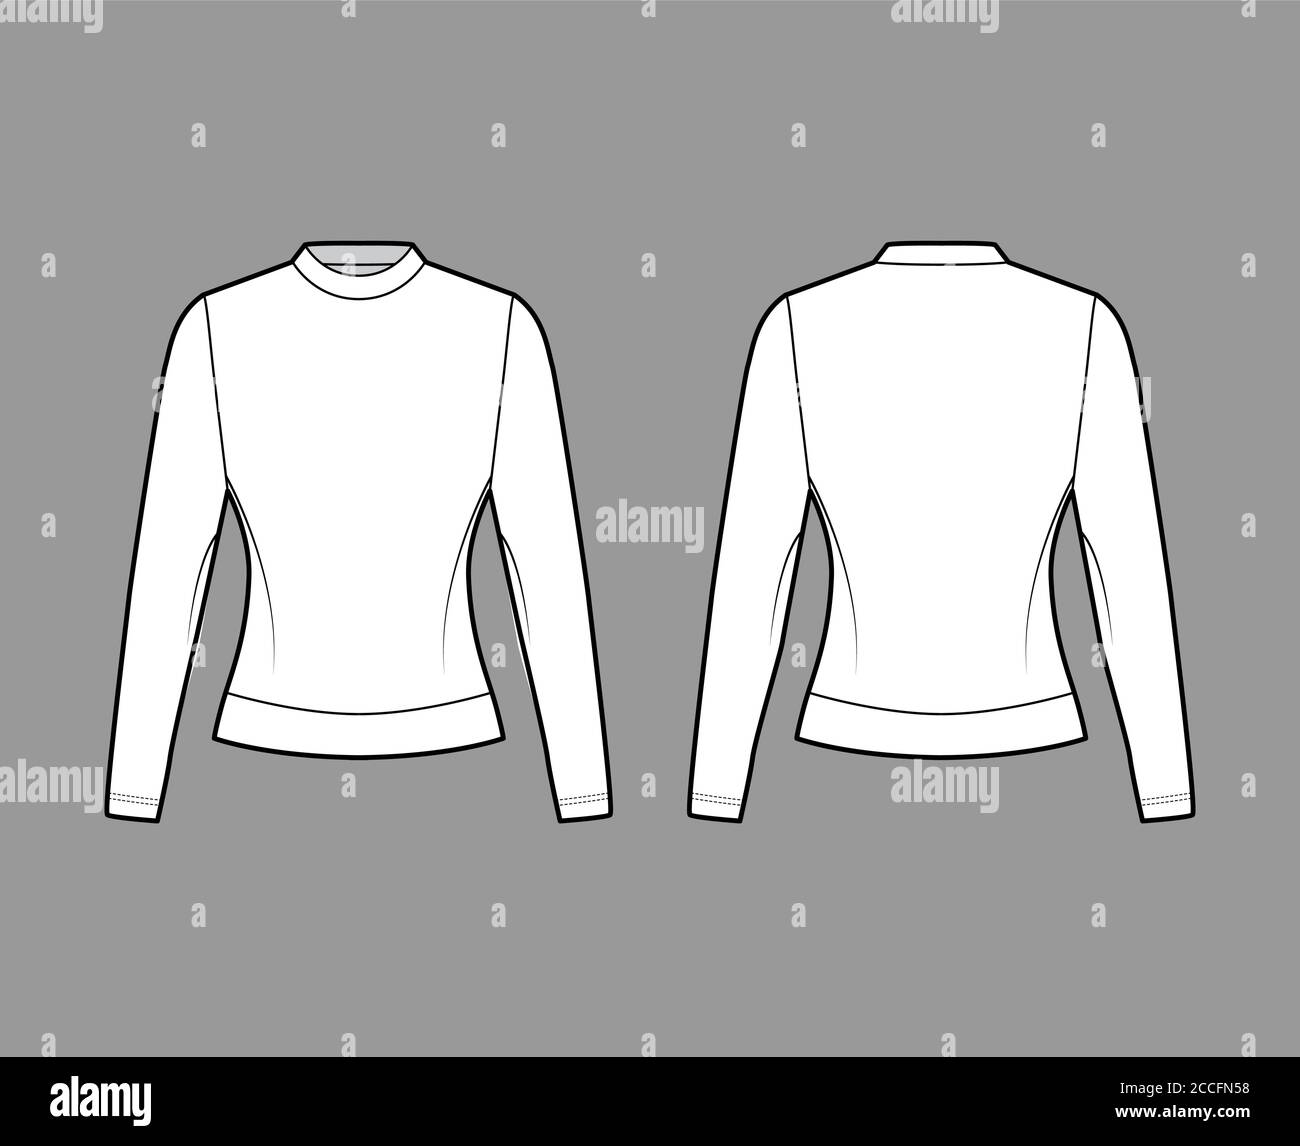 Cotton-terry sweatshirt technical fashion illustration with fitted body, crew neckline, long sleeves. Flat jumper apparel outwear template front, back white color. Women, men, unisex top CAD mockup Stock Vector